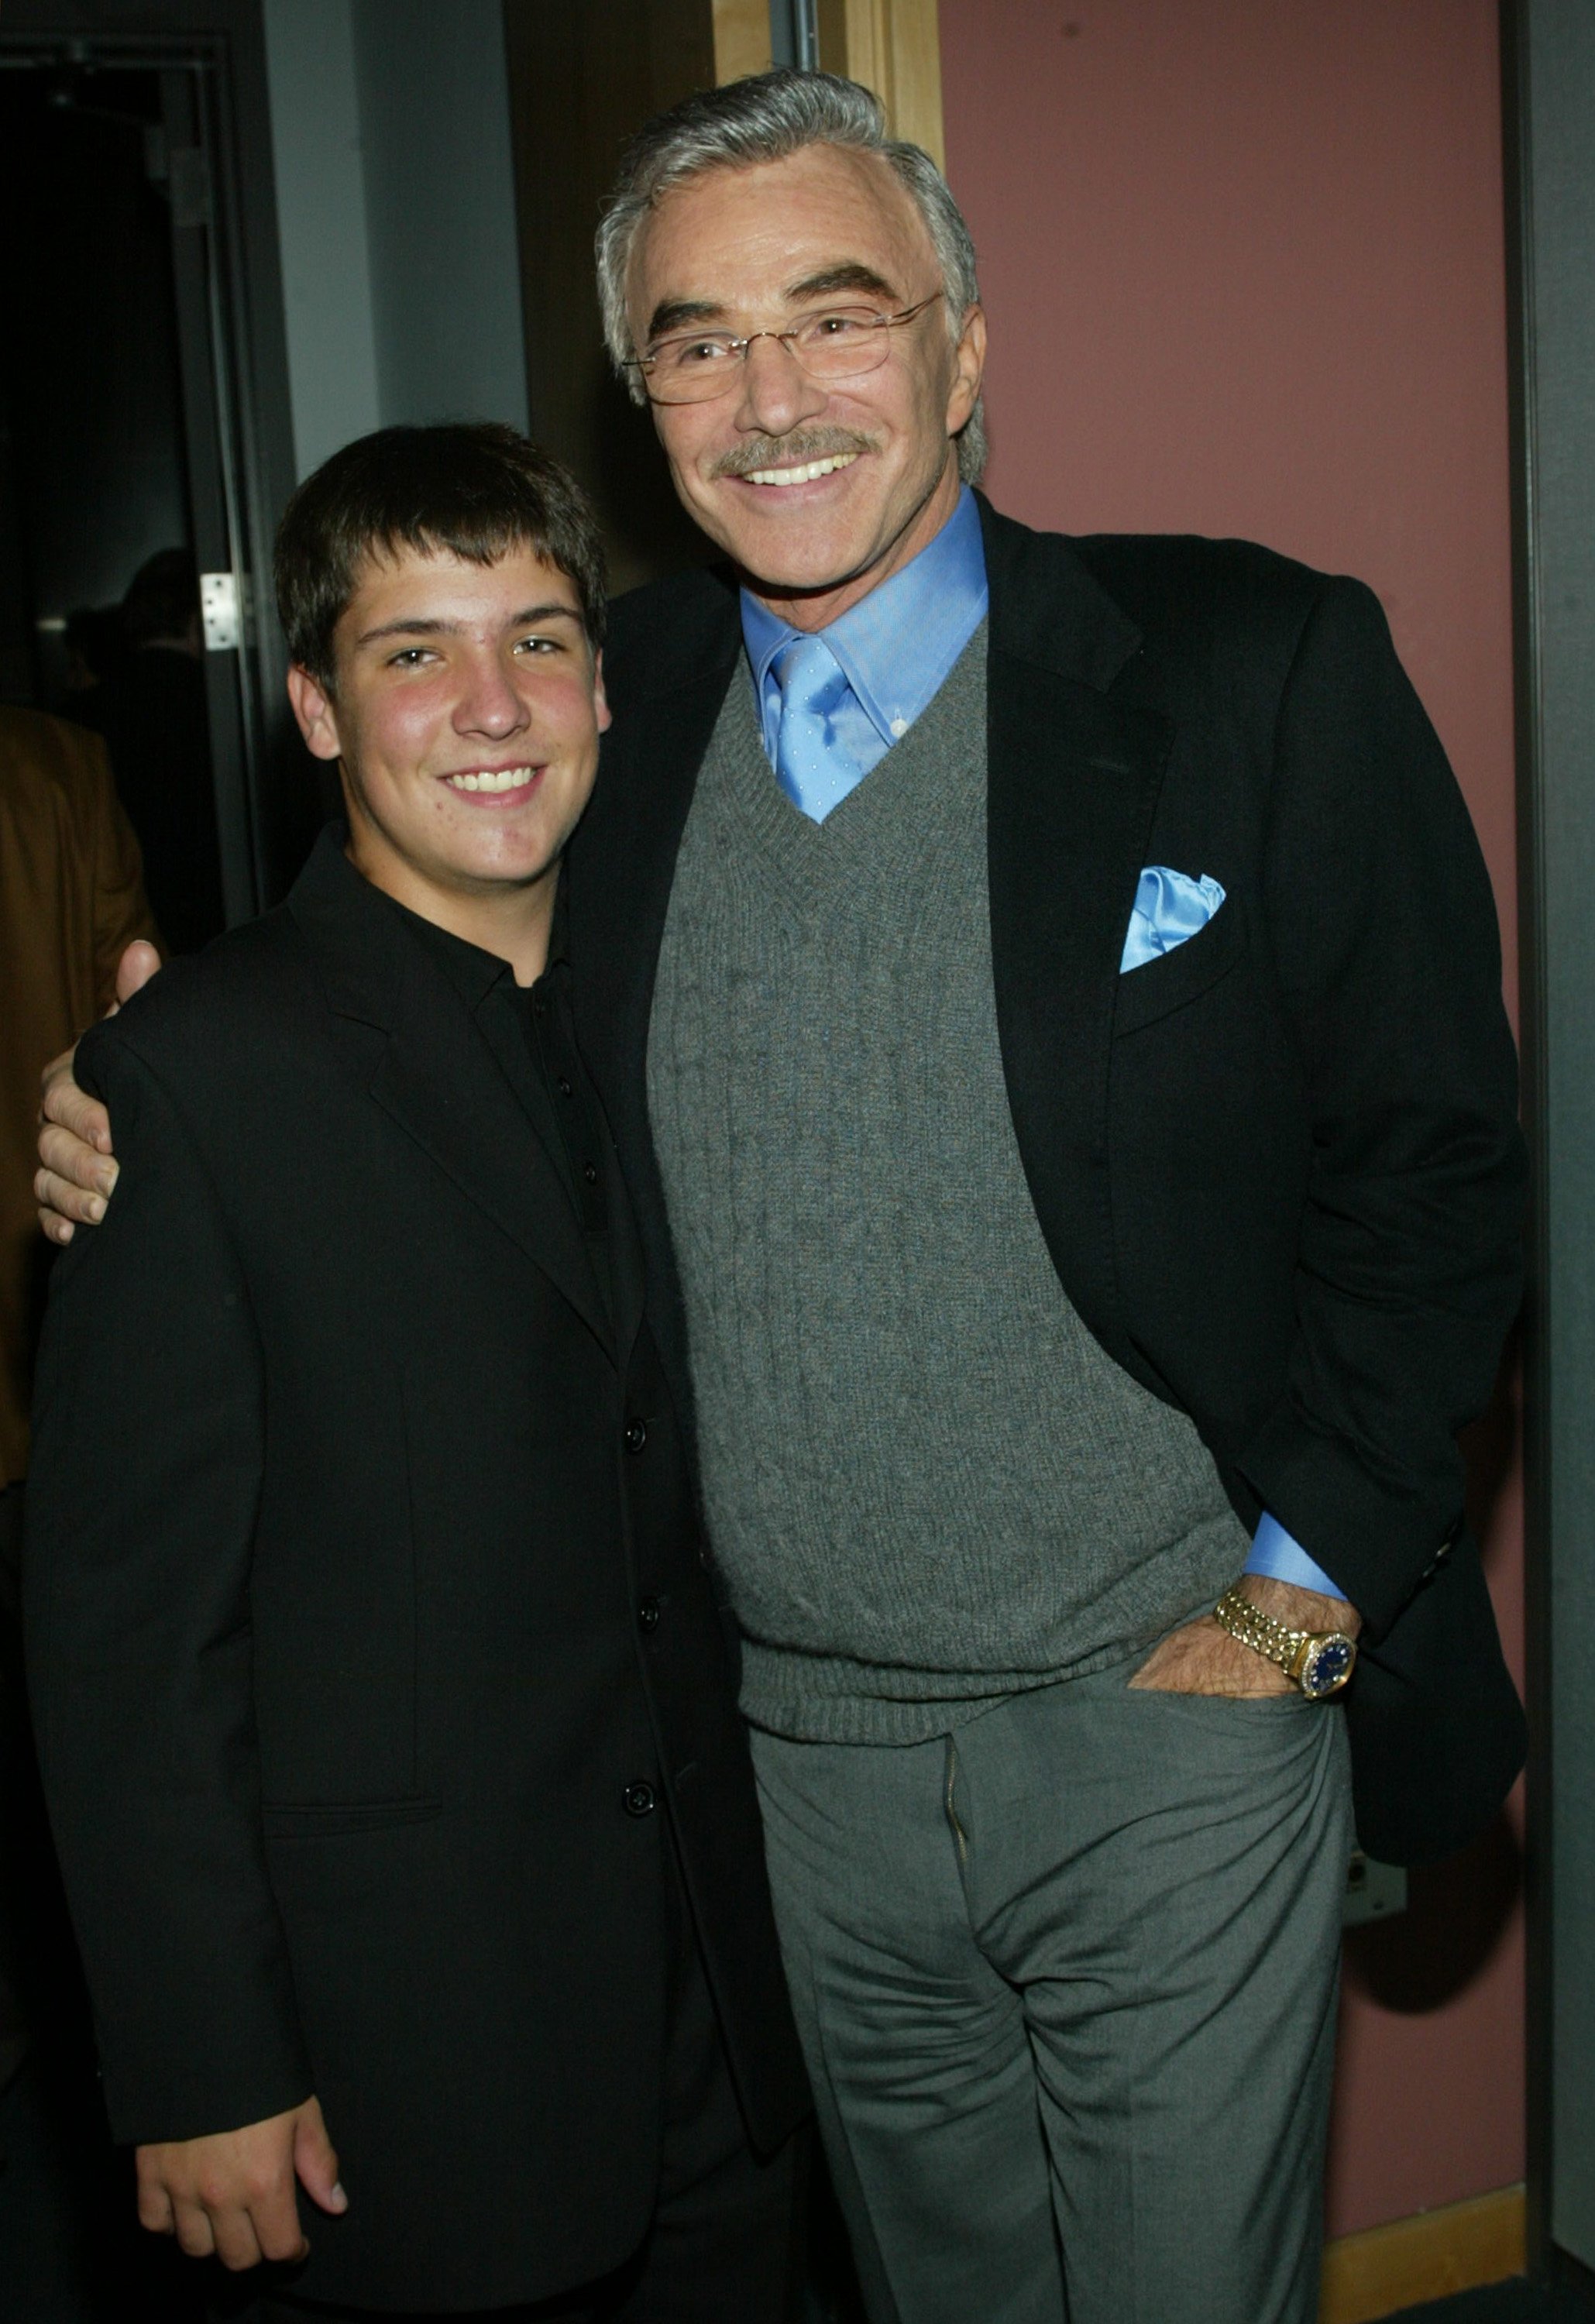 Actor Burt Reynolds and his son, Quinton attend the Fourth Annual Actors' Fund of America Gala in 2003. | Source: Getty Images